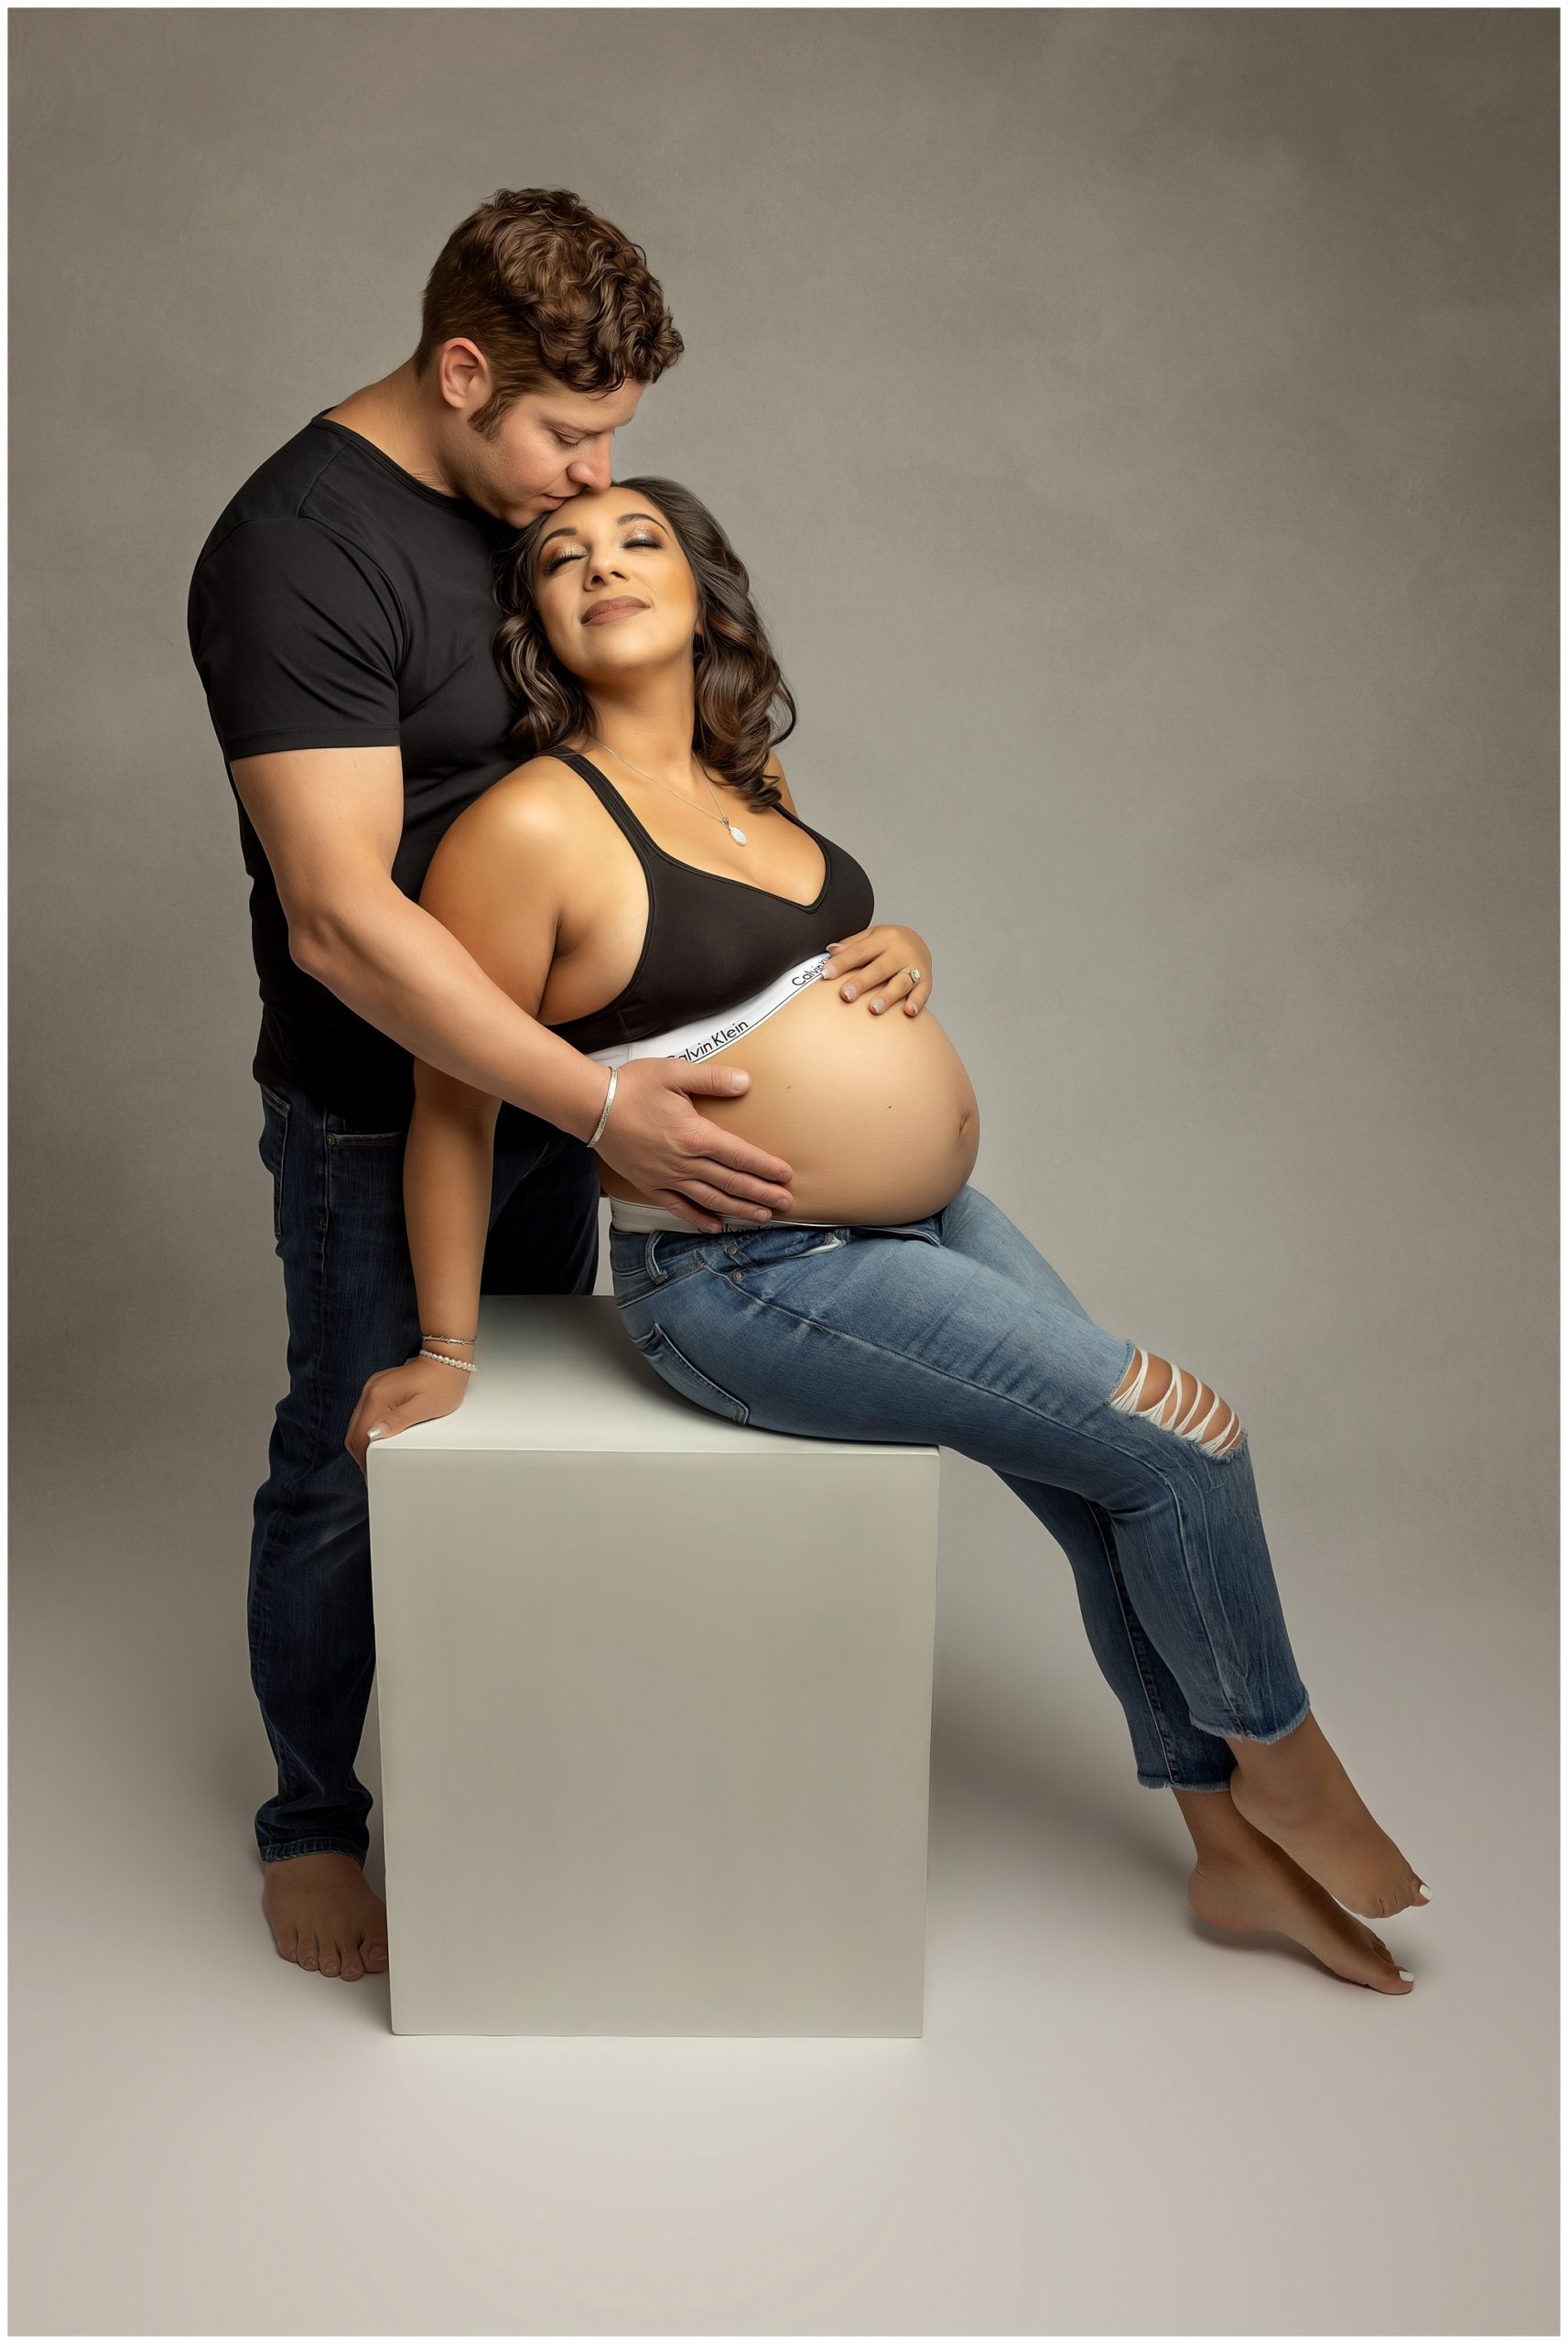 Soon to be dad kisses the forhead and holds the bump of mother to be while sitting on a box in a studio midwives charleston sc